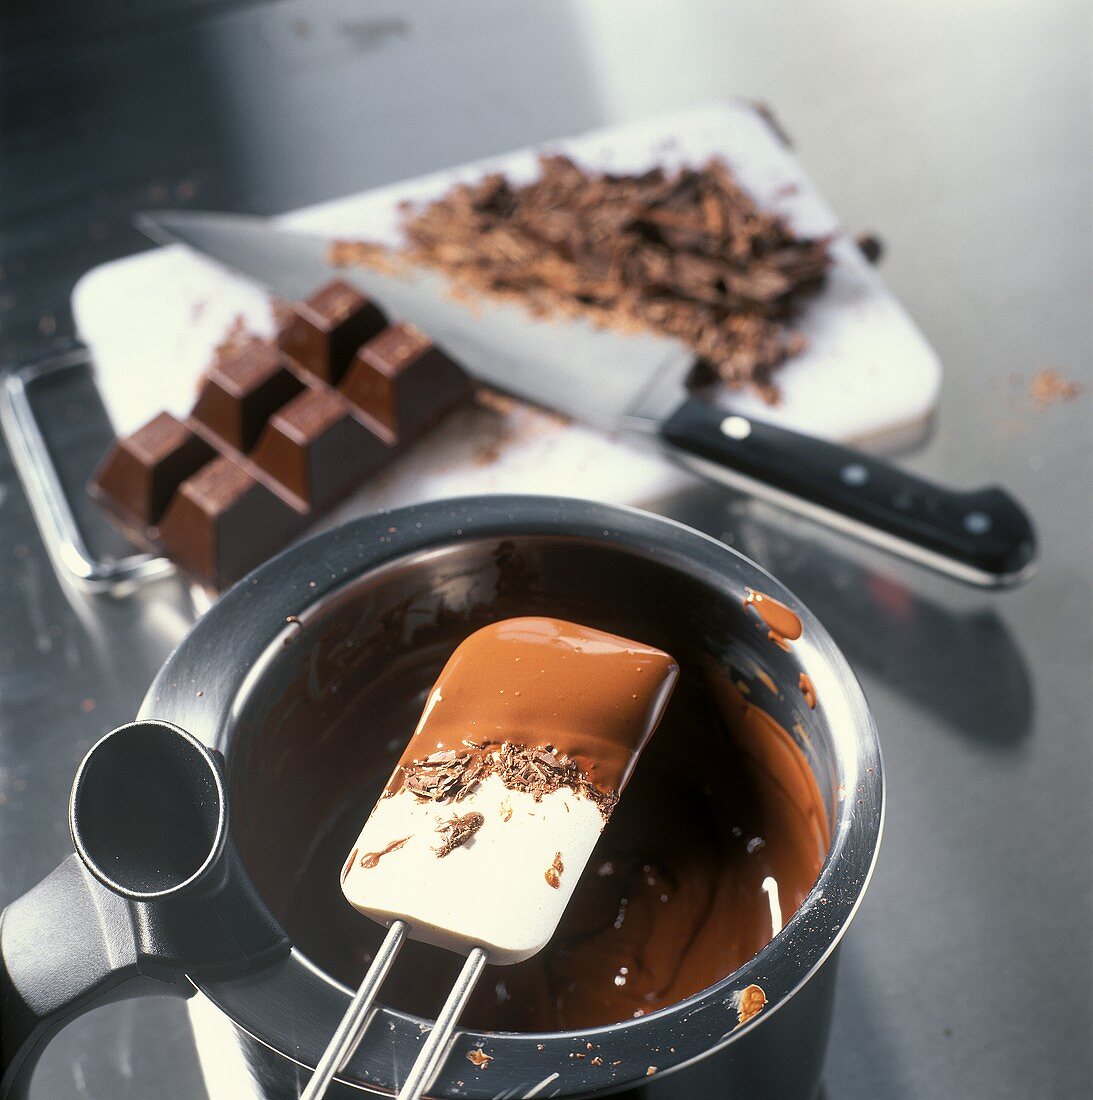 Making chocolate mousse: melting couverture